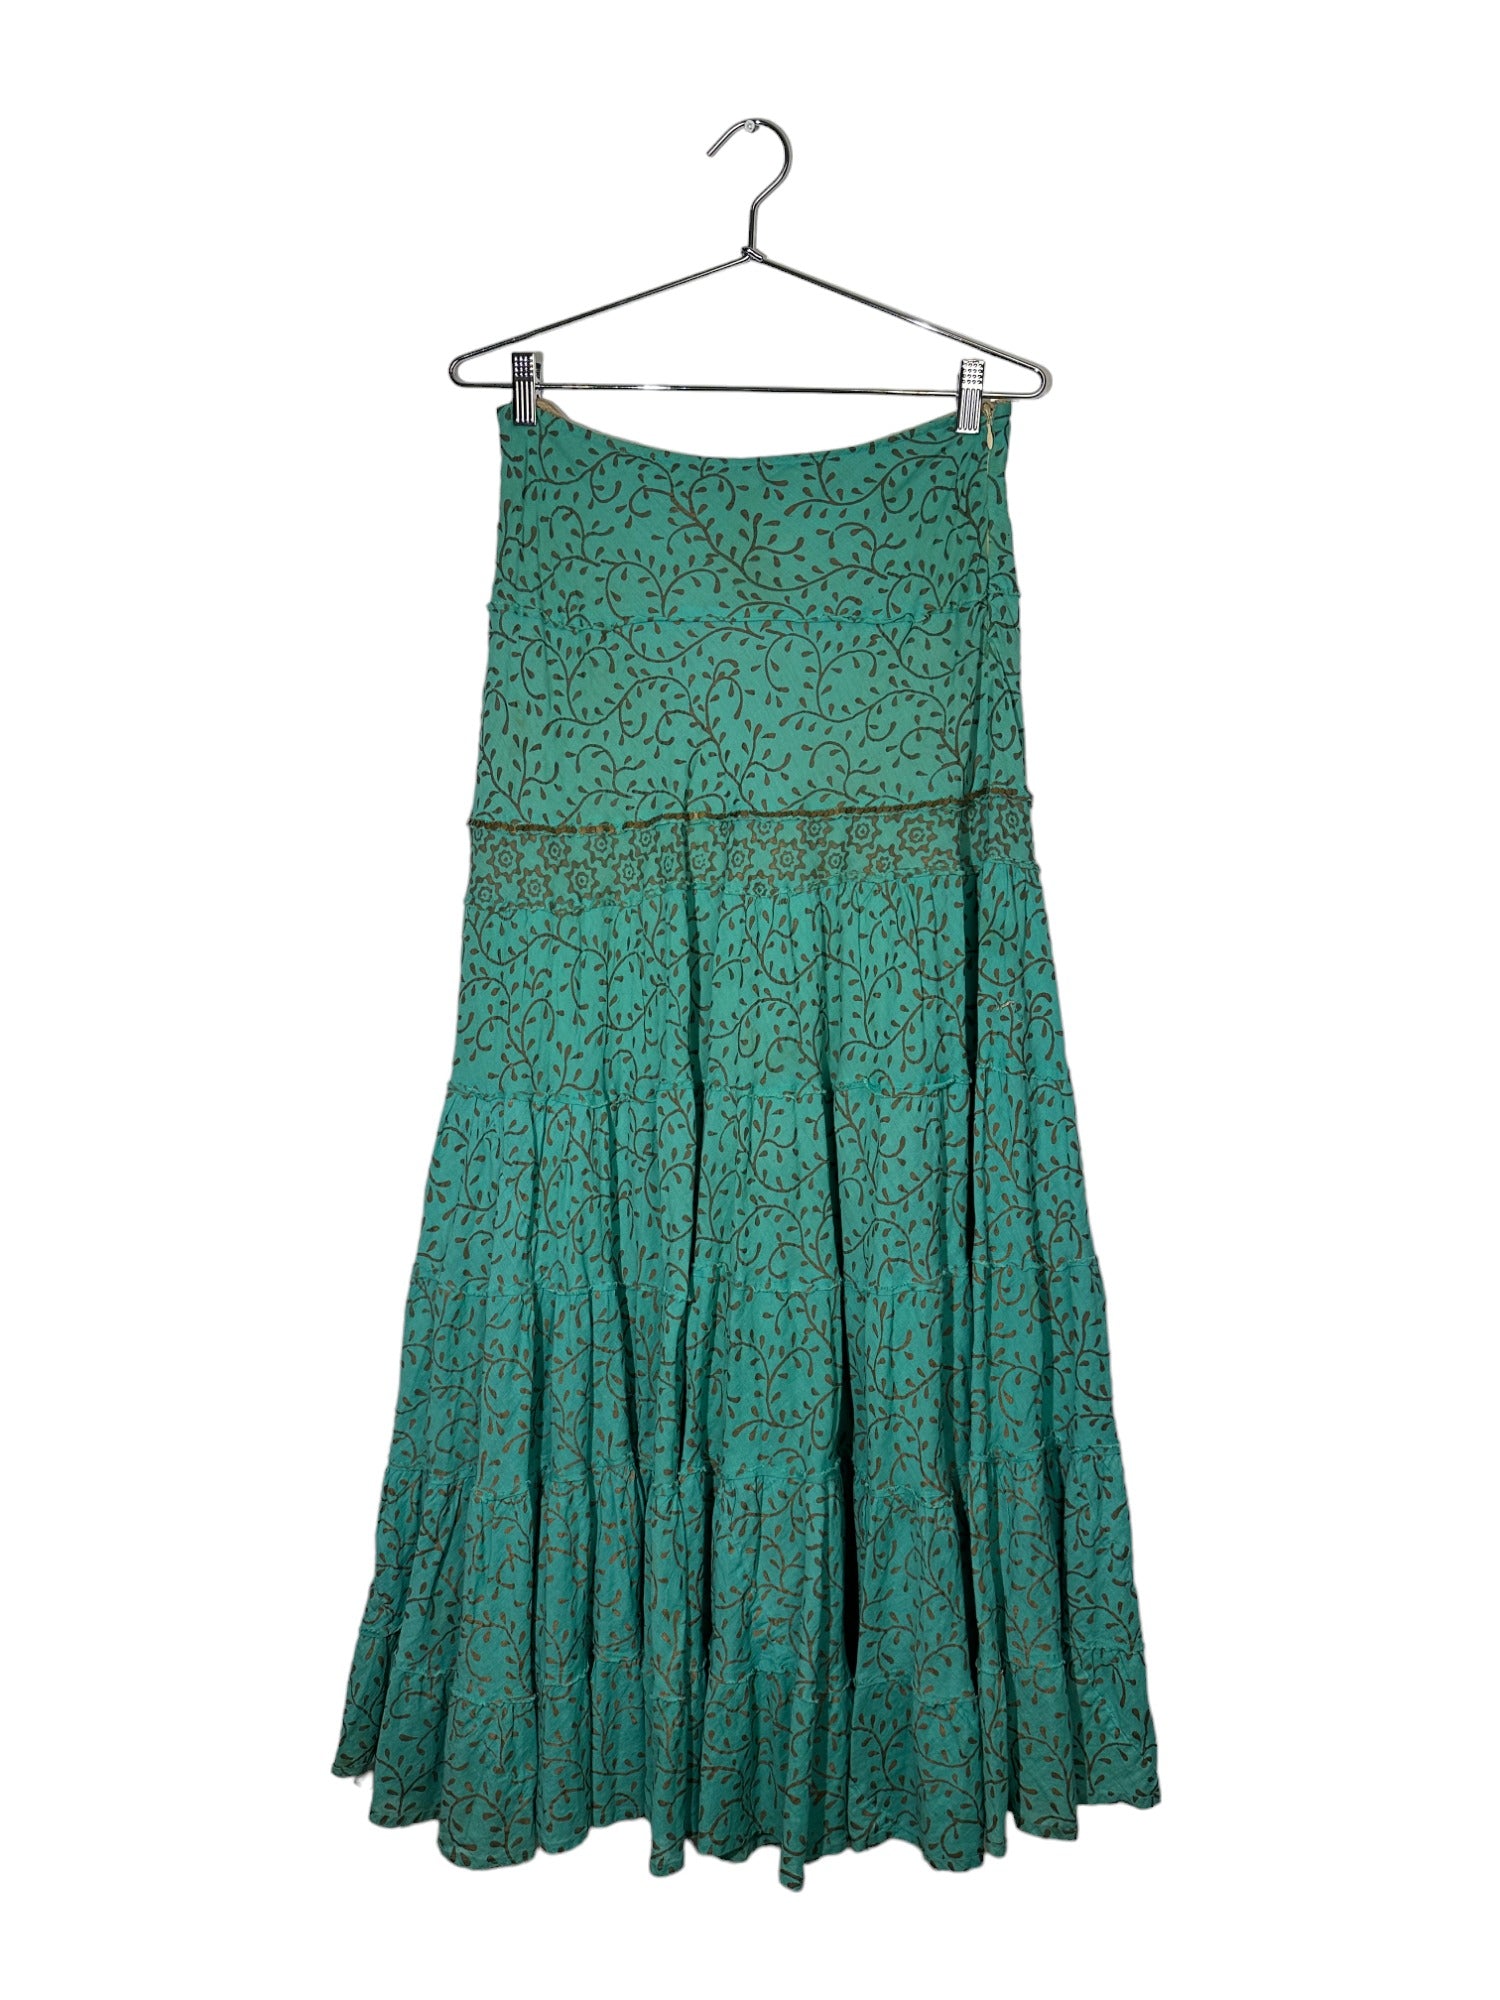 Teal Vine Pattern Tiered Skirt with Gold Sequin Detailing